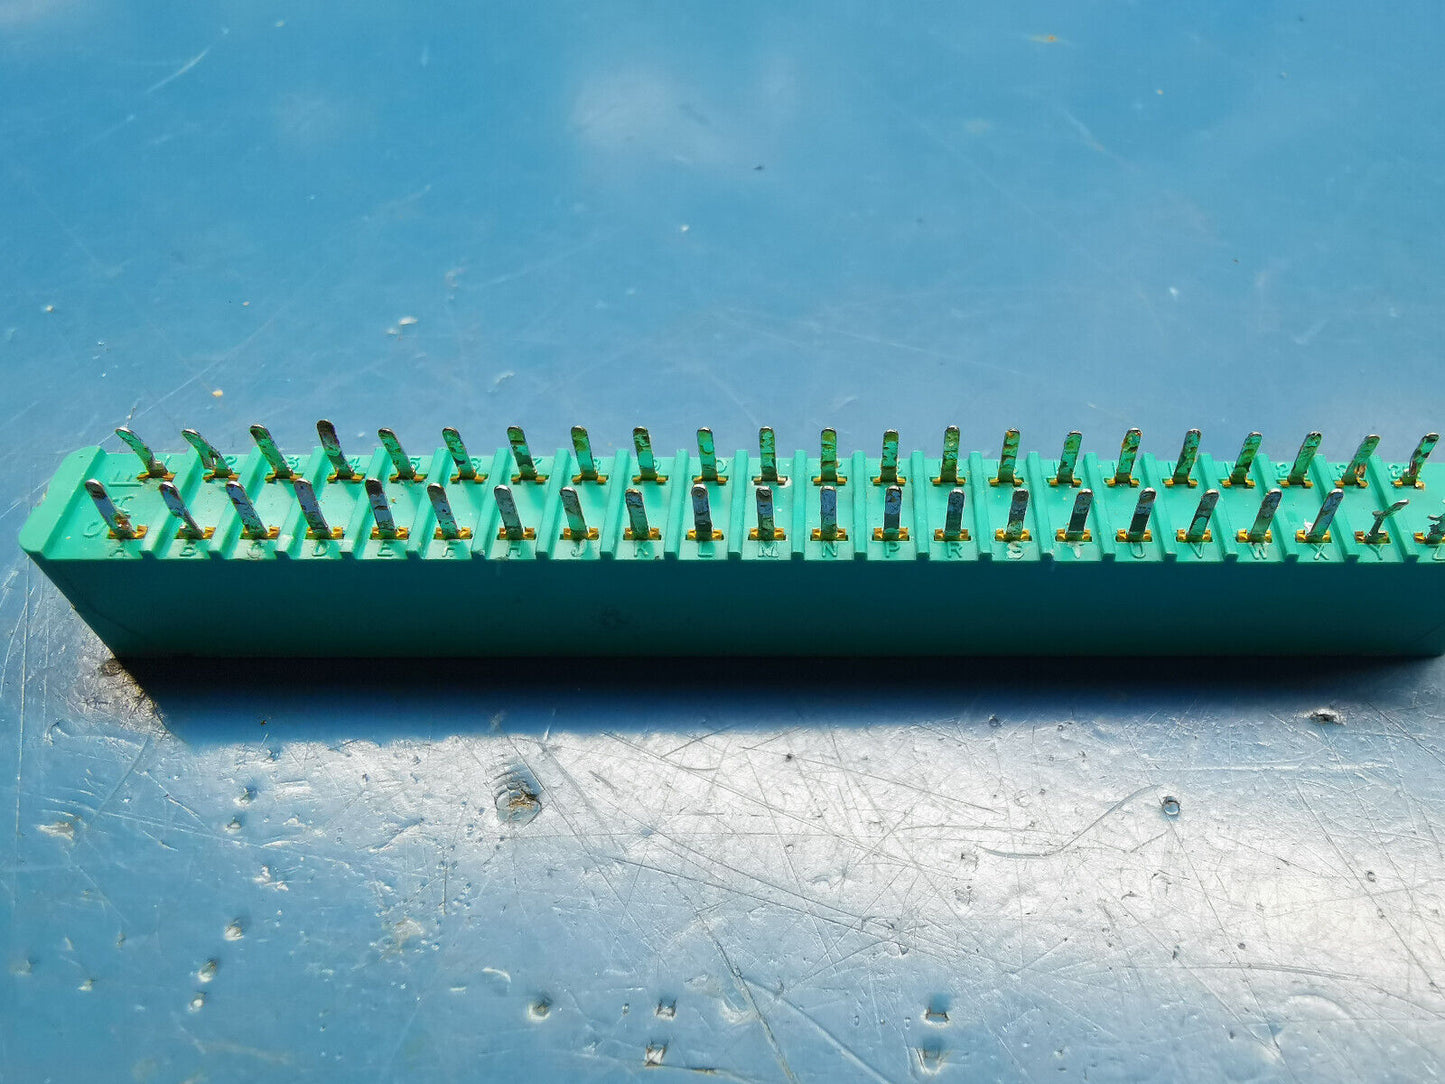 Genuine SCM 44 Pin PCB Edge Connector Used In Apple One